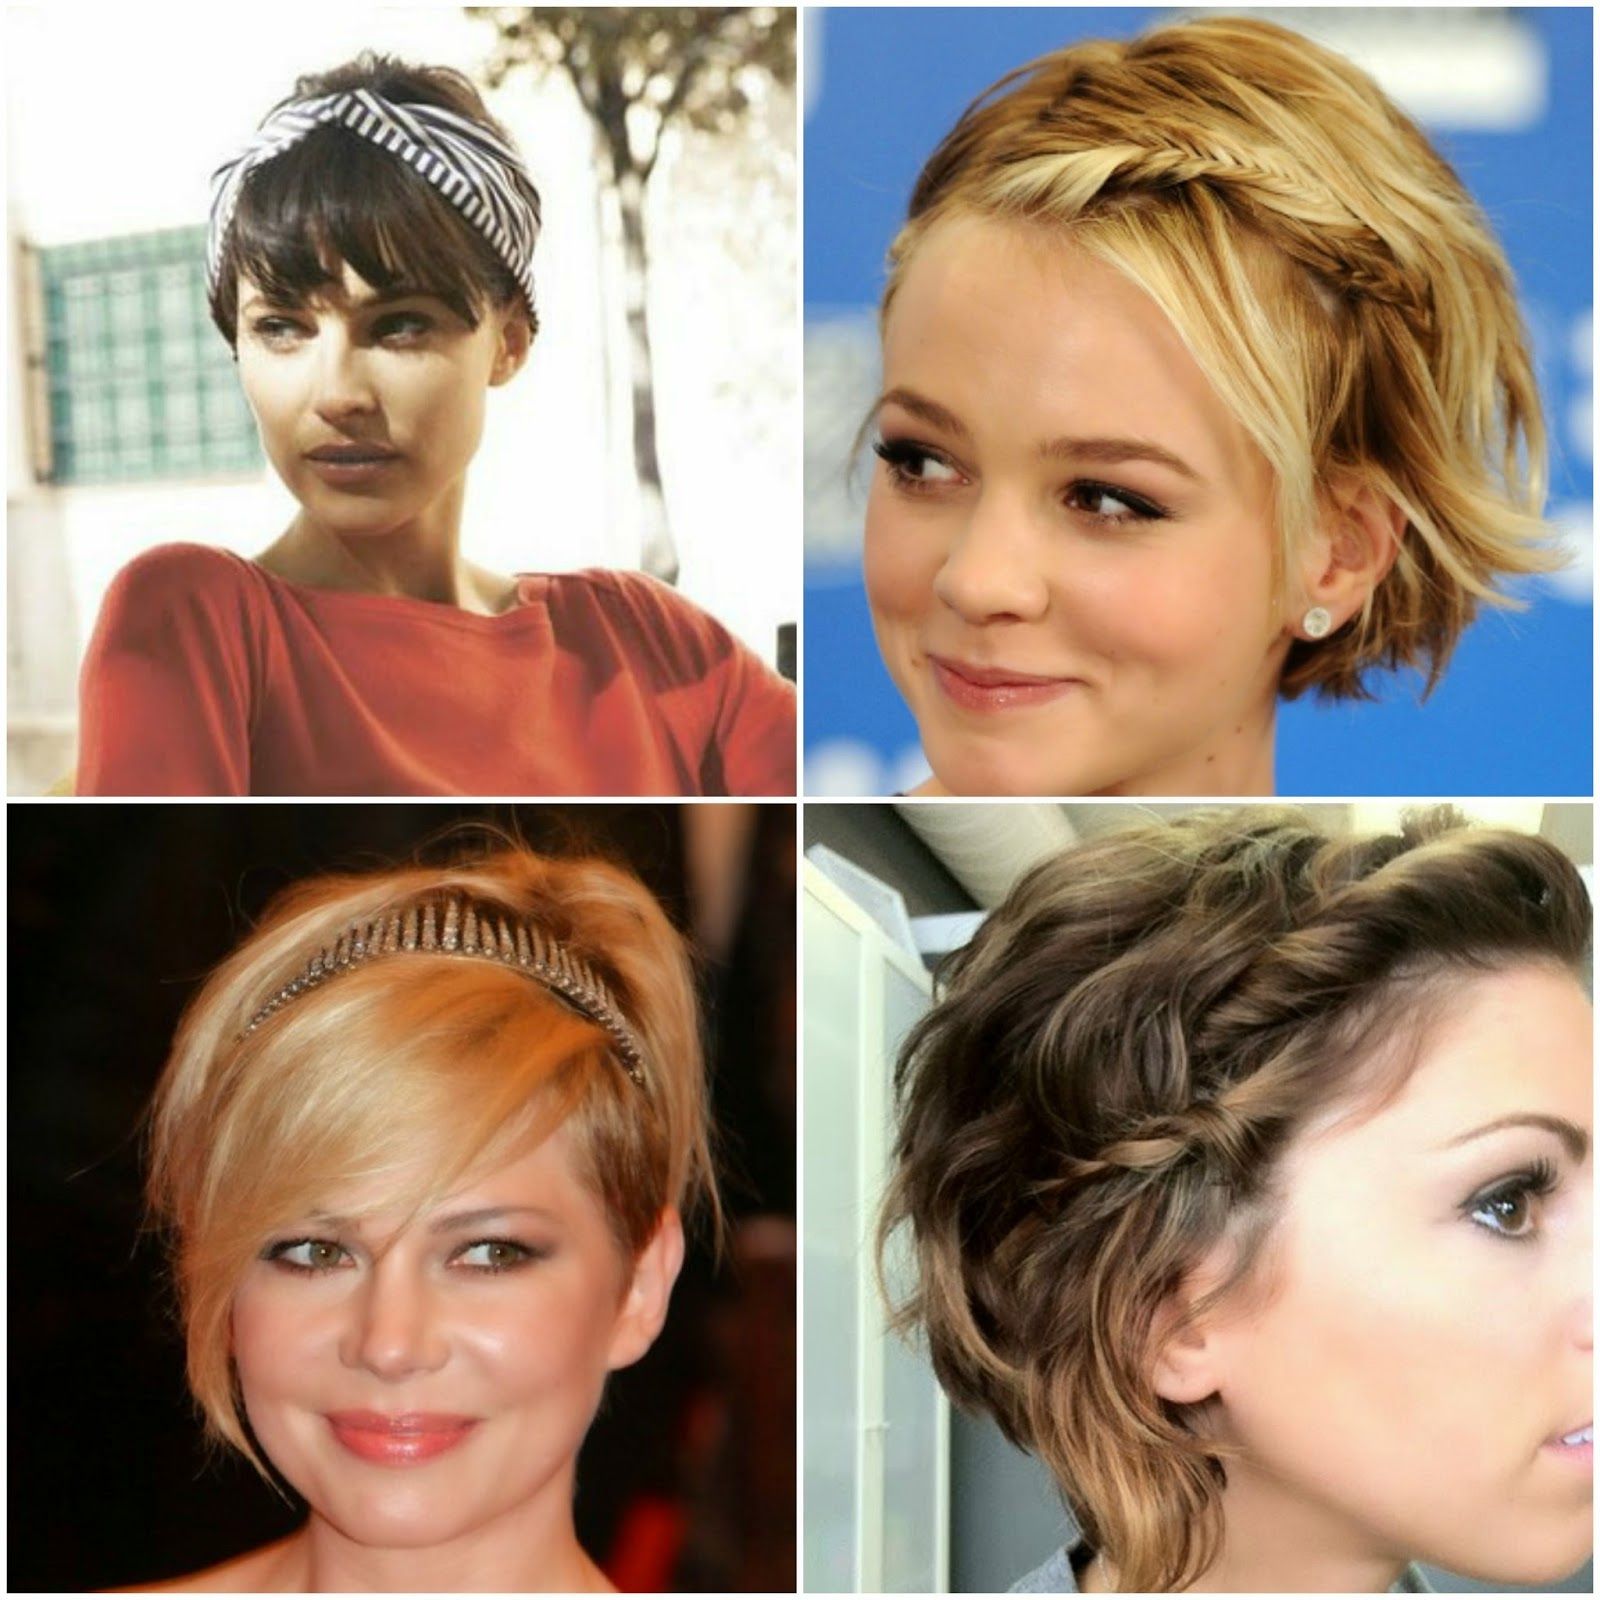 Growing Out My Pixie Cut Like : Trollxchromosomes With Regard To Stylish Grown Out Pixie Hairstyles (View 9 of 20)